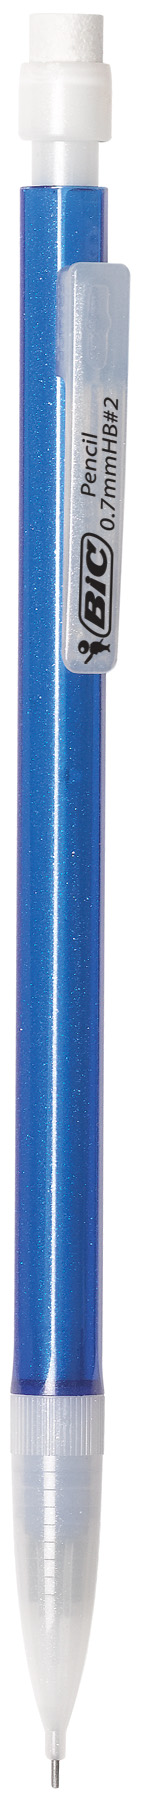 BIC Xtra-Sparkle No. 2 Mechanical Pencils with Erasers, Medium Point (0.7mm), 24 Pencils - image 3 of 7